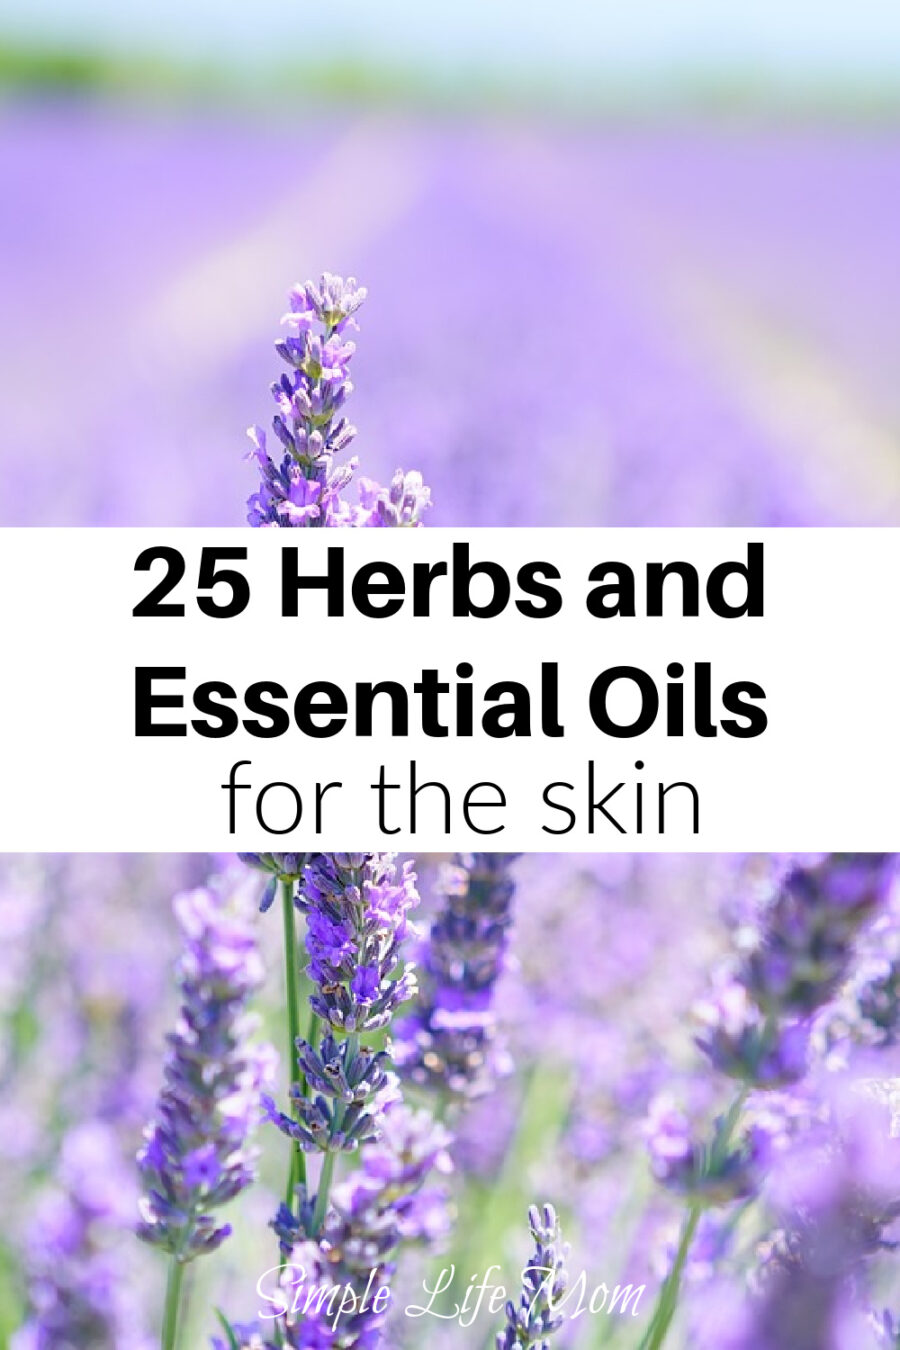 Natural organic, herbal skin care created by using herbs and essential oils. I give you 25 different herbs and essential oils to use for various skin conditions